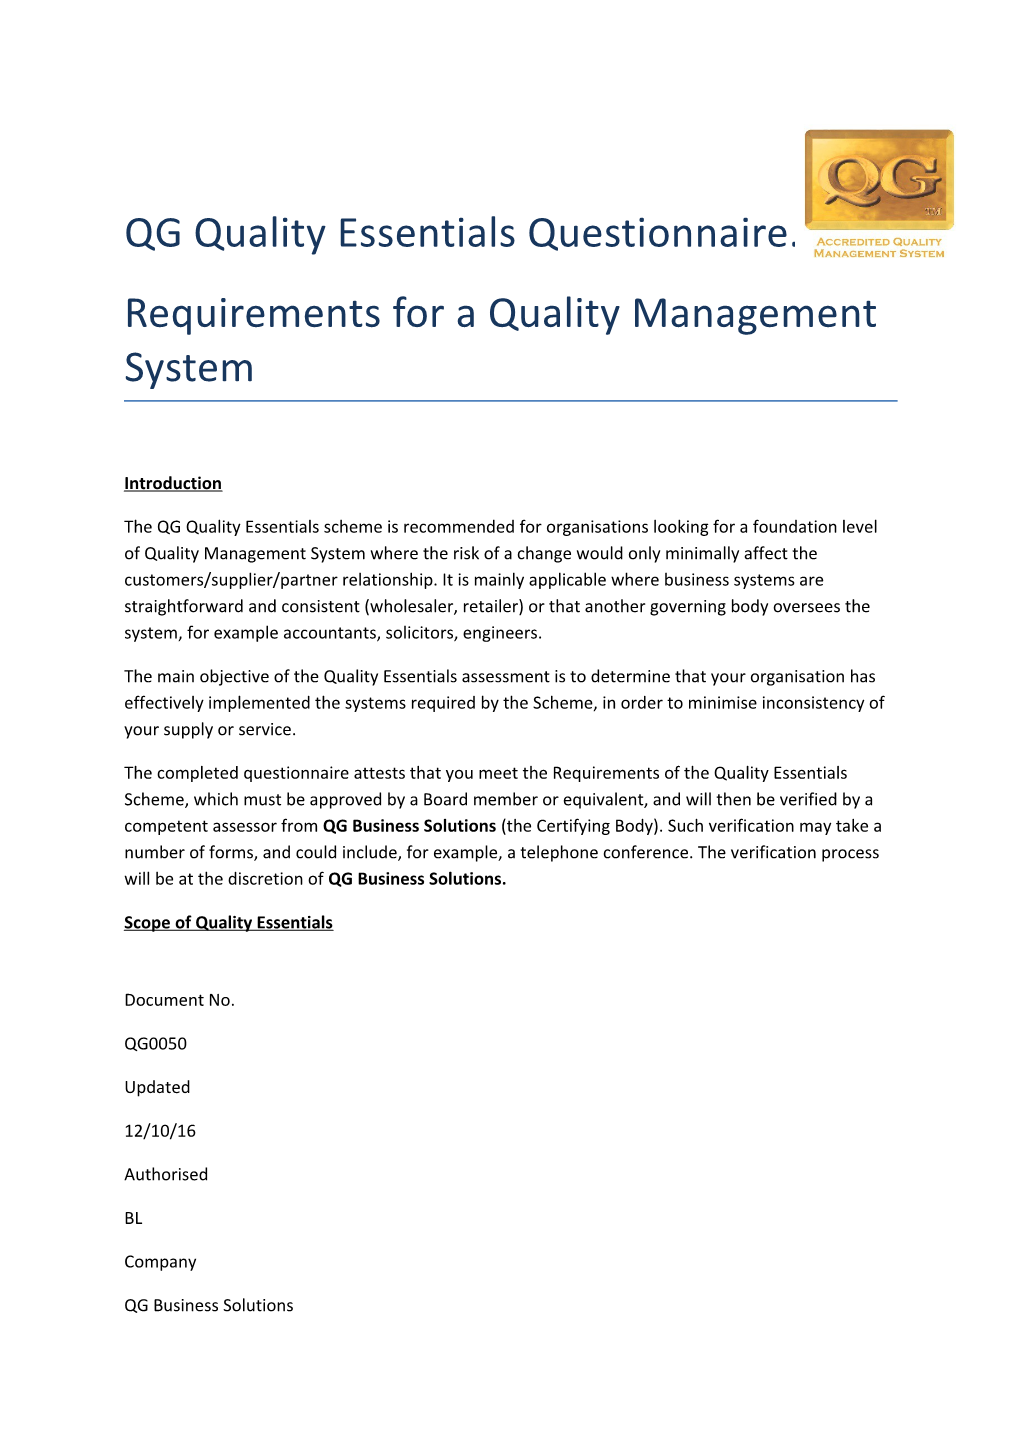 Requirements for a Quality Management System